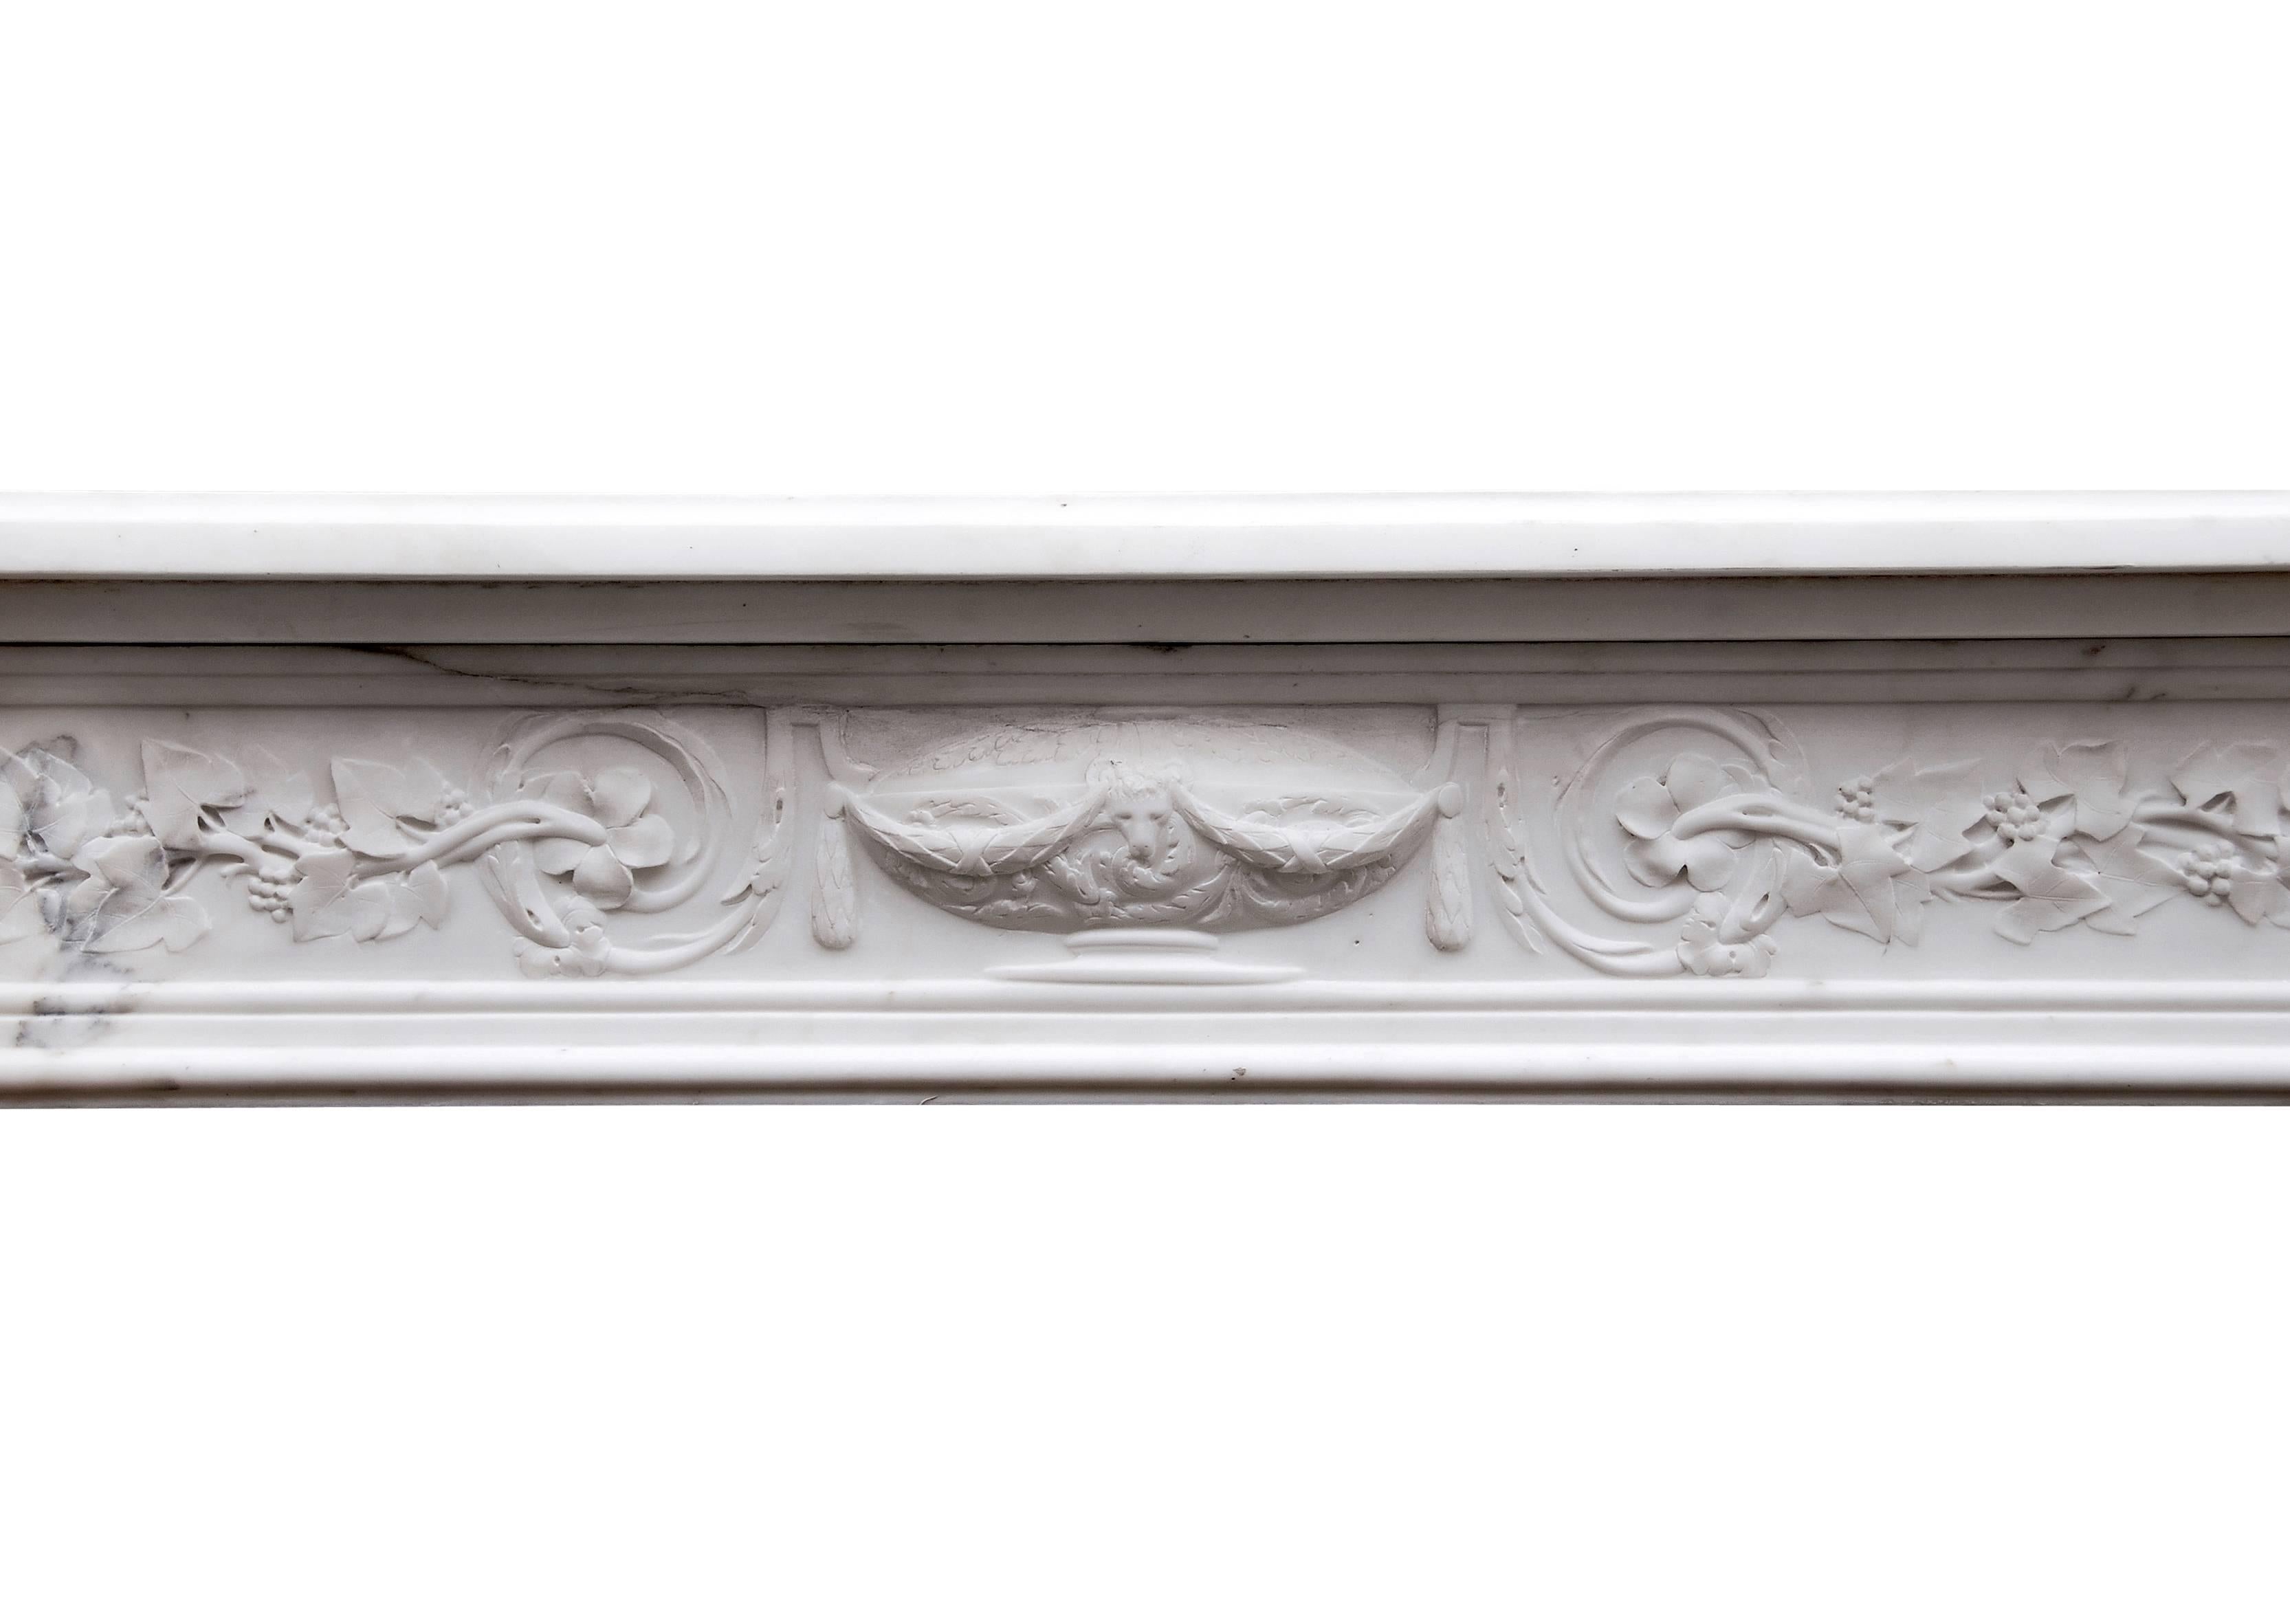 18th Century and Earlier Period 18th Century French Louis XVI Statuary Marble Fireplace For Sale